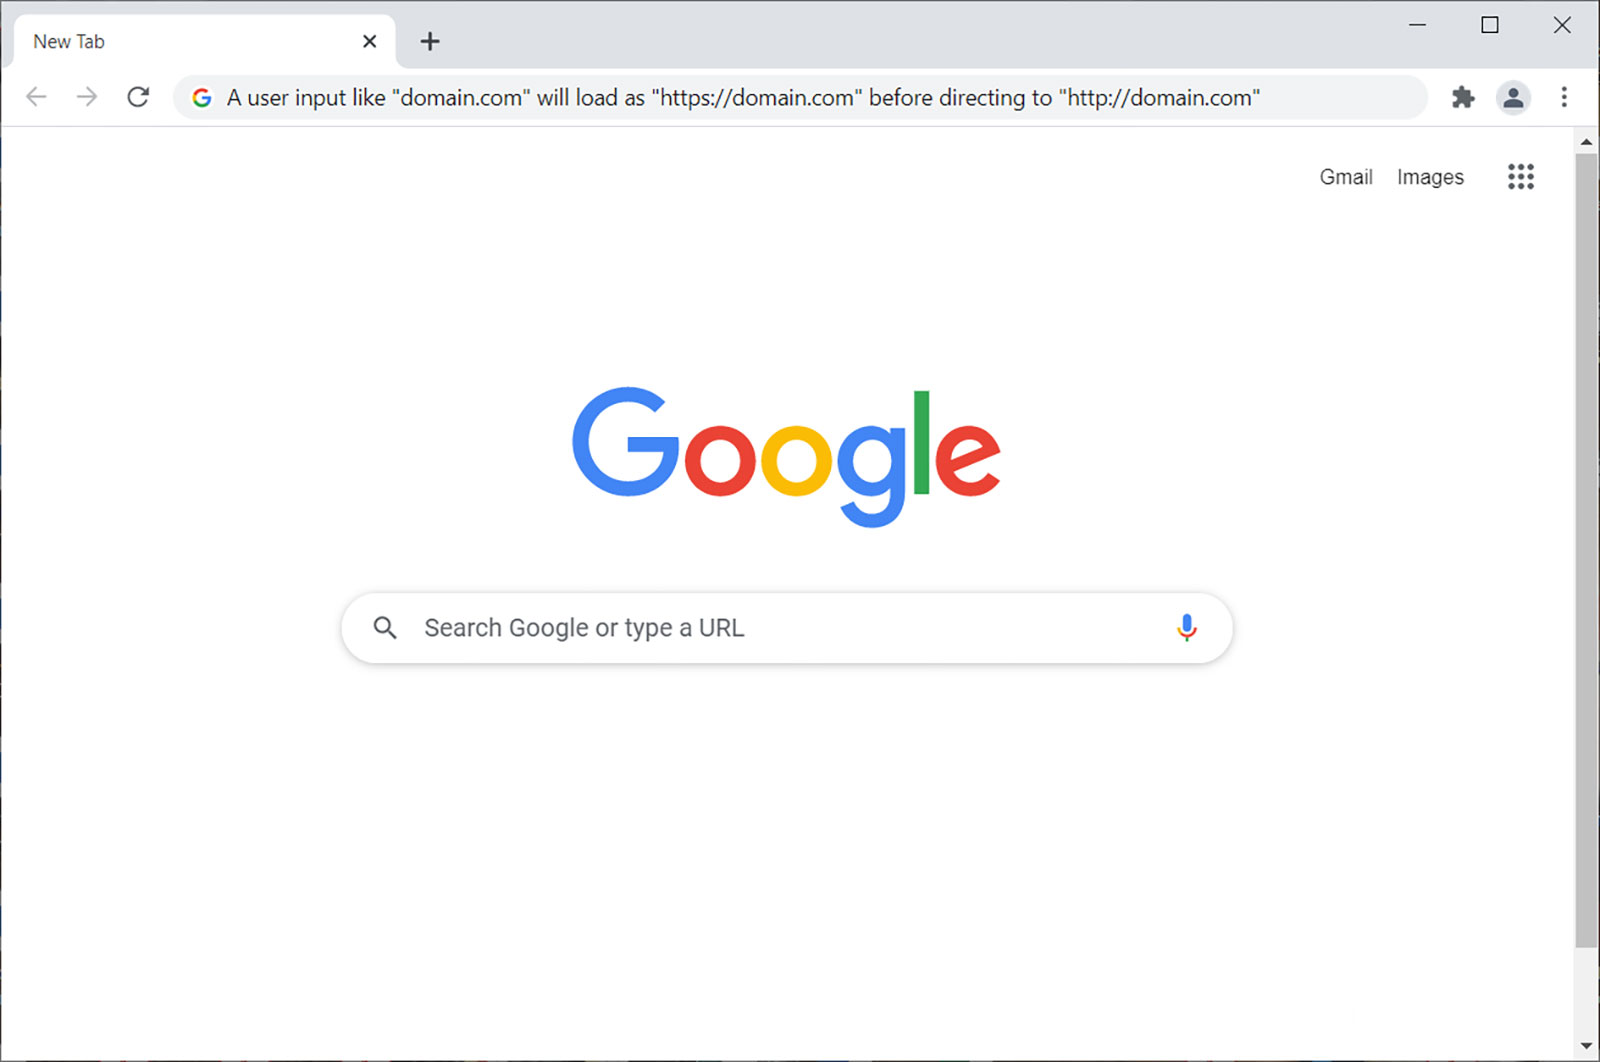 What Is The URL For Google Chrome?